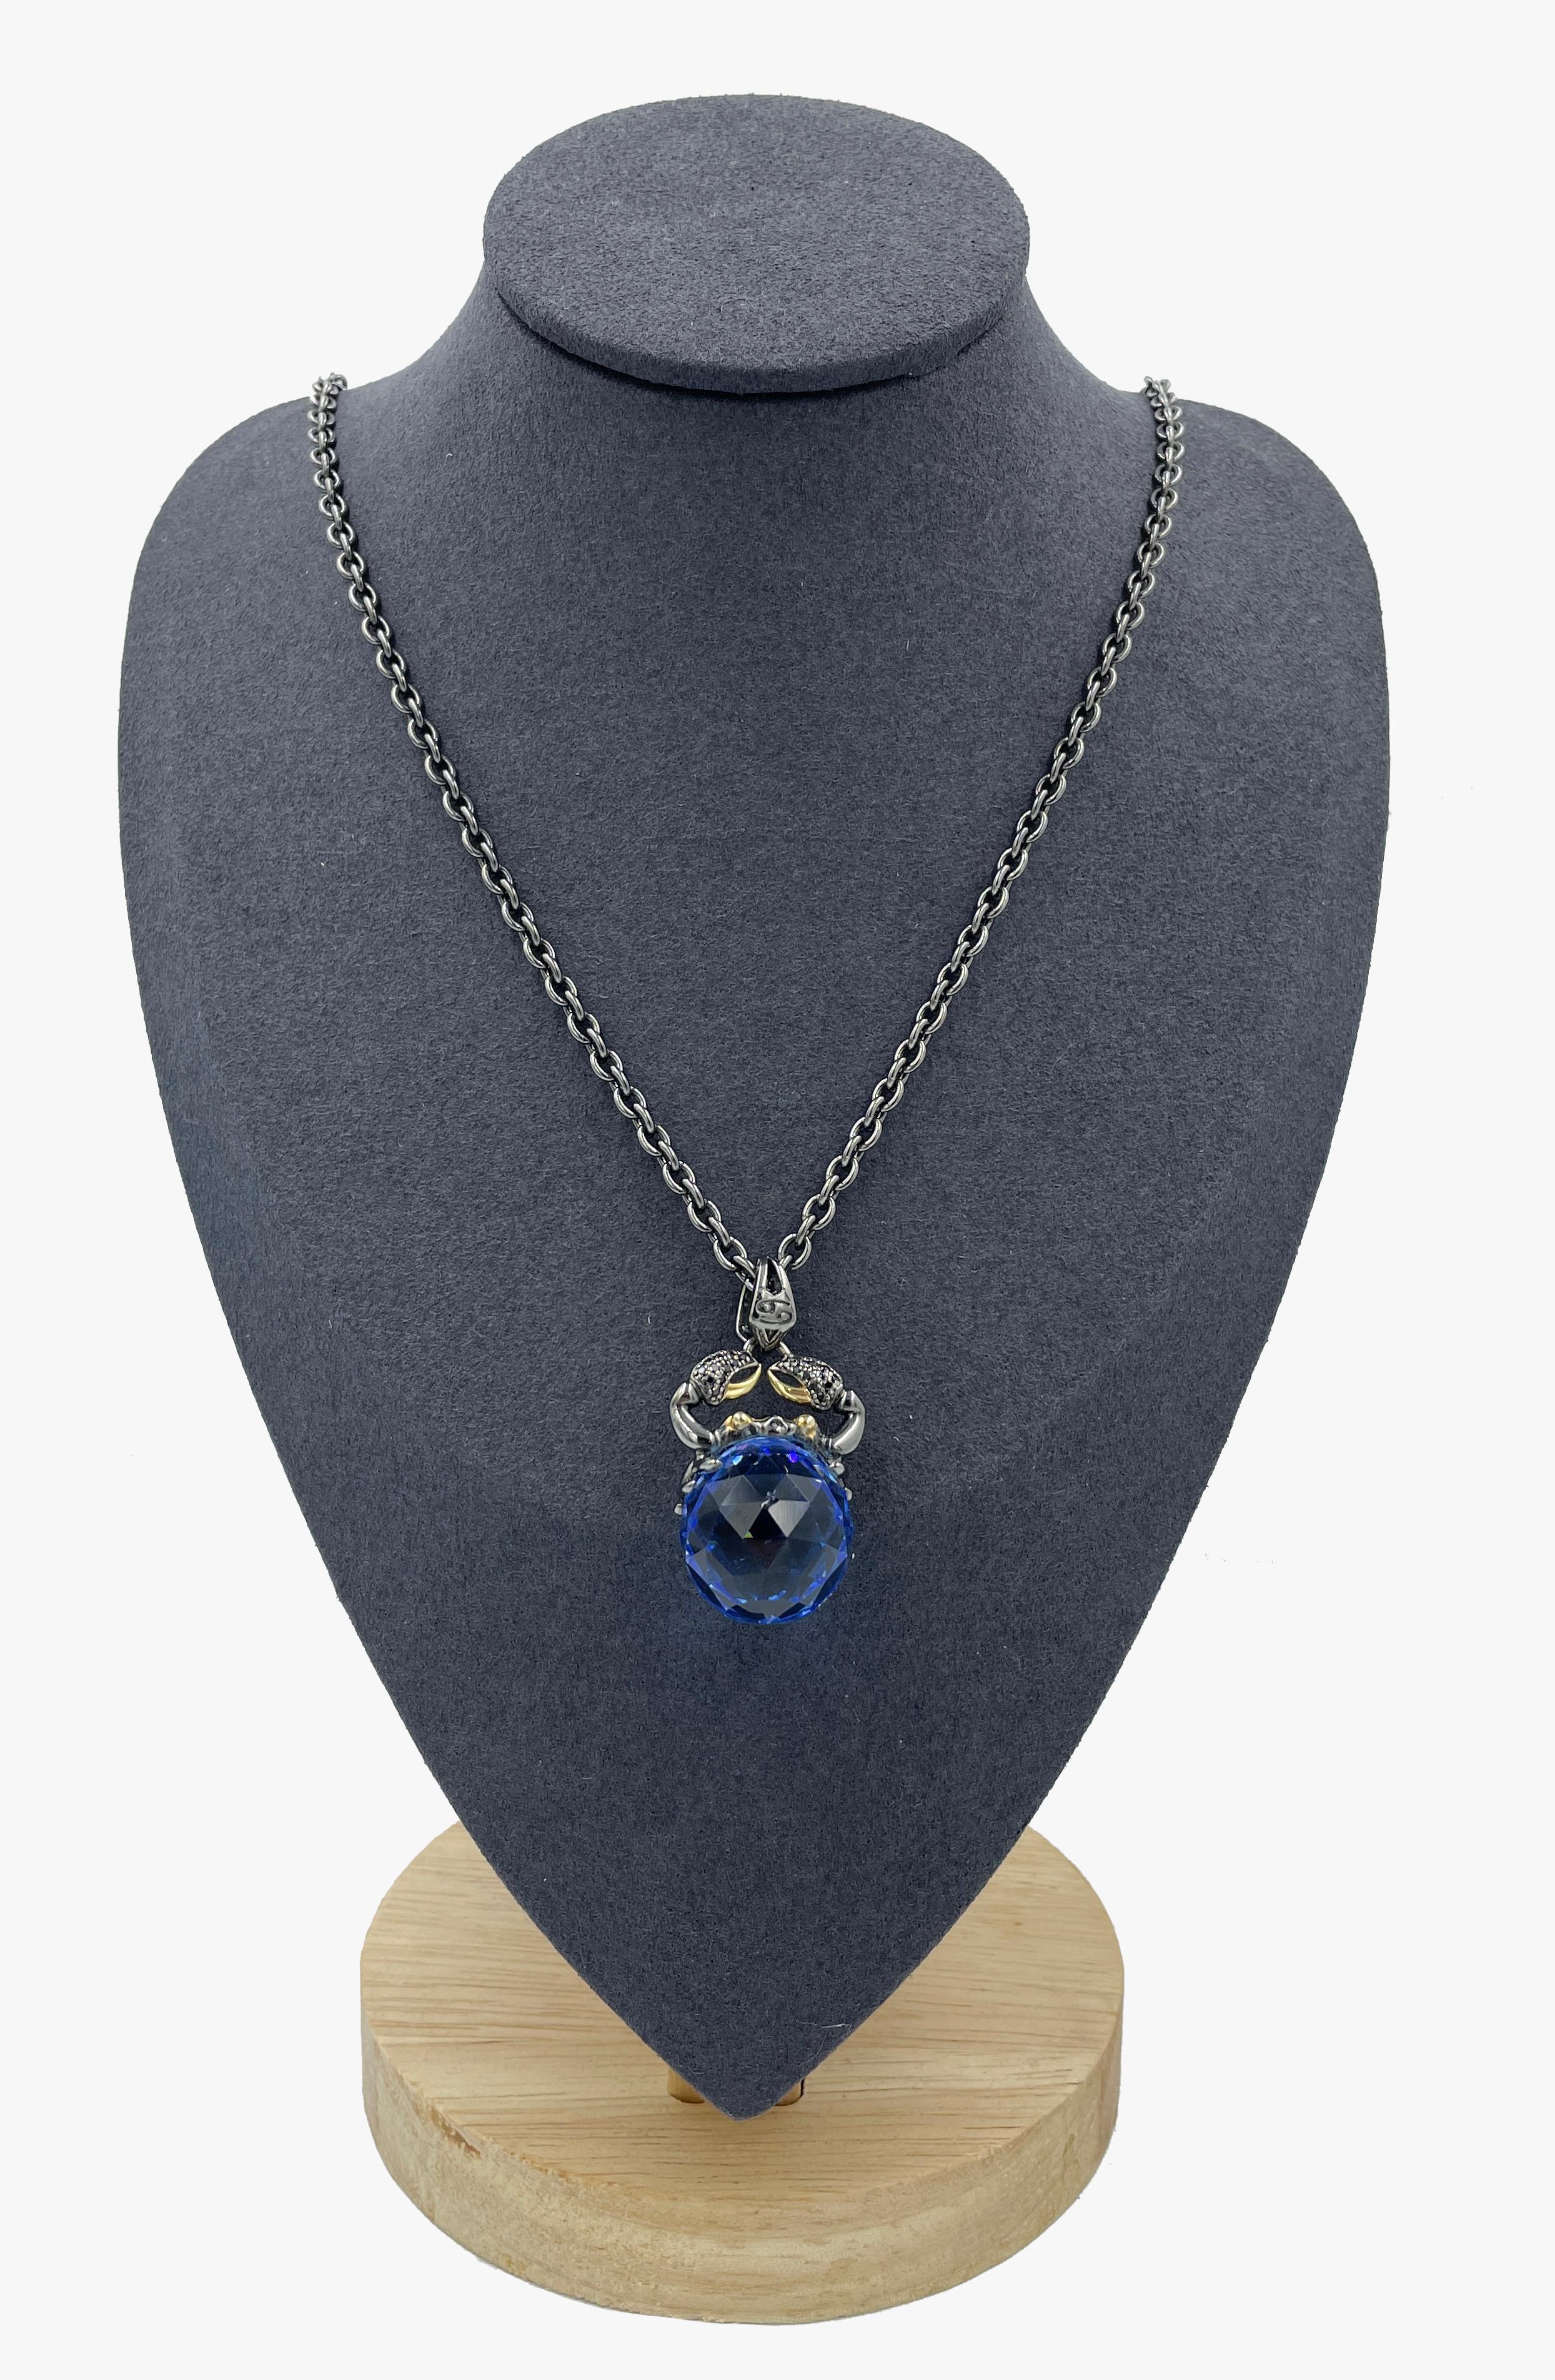 Stephen Webster blue glass pendant from Zodiac collection featuring Cancer sign. 

Chain made of  925 silver. 

Total length – 43 cm / 17”

Сhain length – 38,5 cm / 15”

Signed.

Condition: Very good. A chip on the glass ball.

........Additional